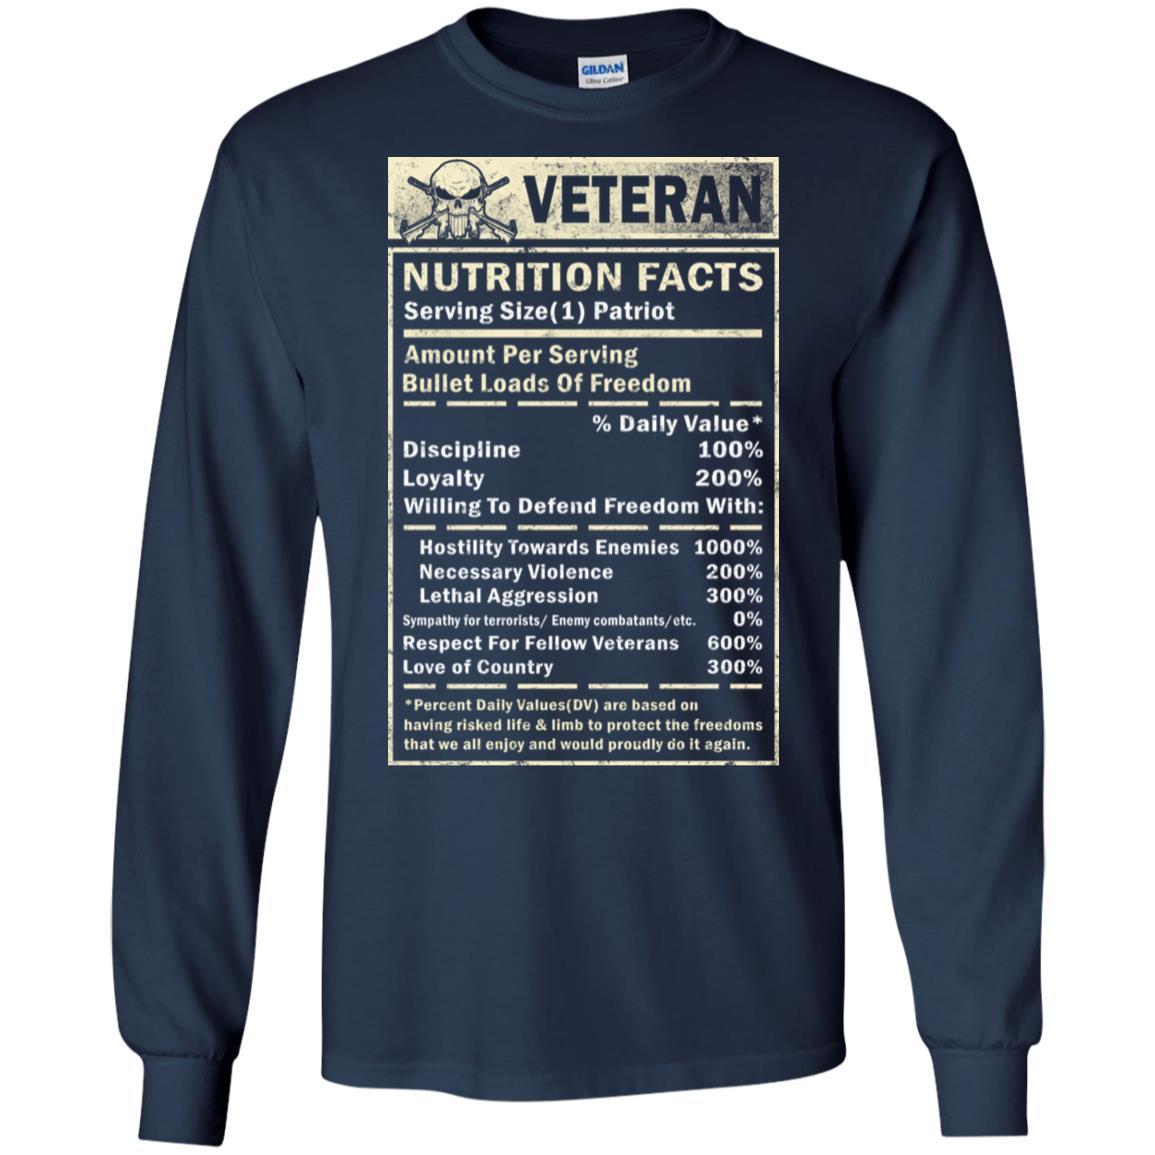 Military T-Shirt "VETERAN NUTRITION FACTS On" Front-TShirt-General-Veterans Nation